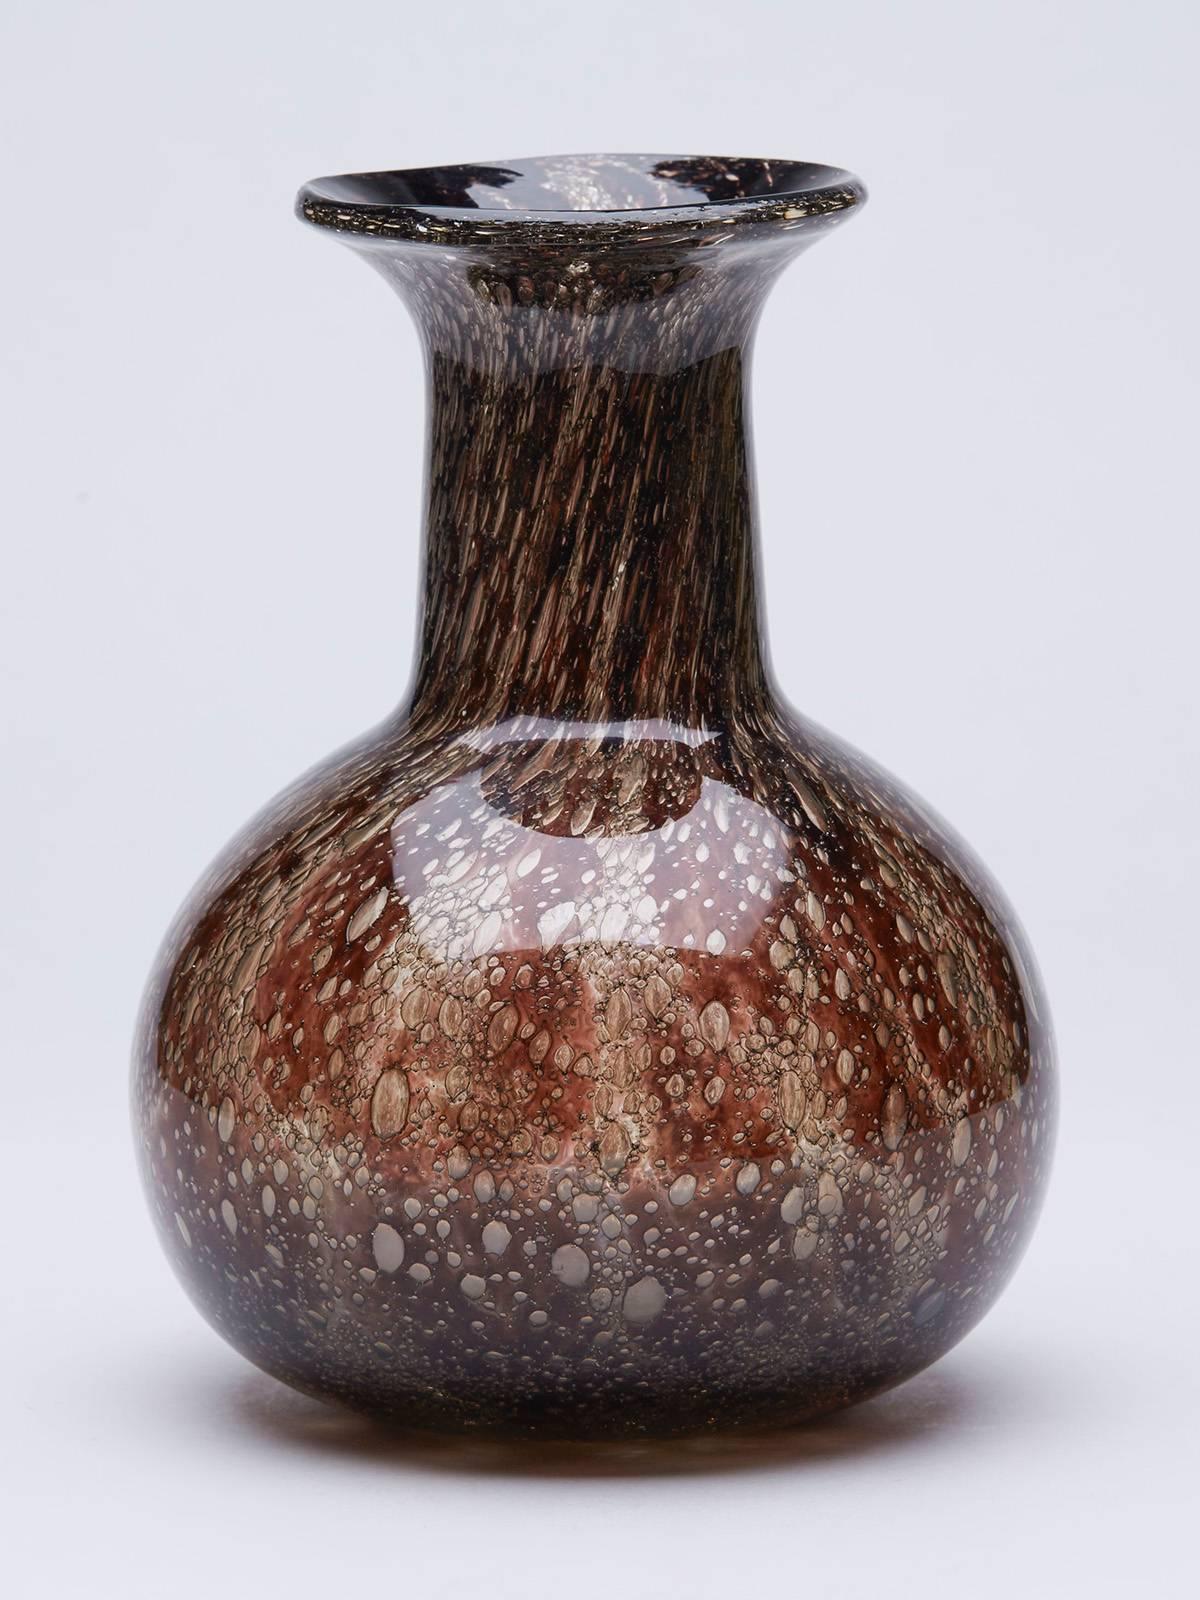 A vintage Murano Effeso art glass vase with reddy brown inclusions in a clear ground with extensive bubbling to the glass designed by Ercole Barovier for Barovier & Toso. The vase has a rounded body with narrow funnel neck and trumpet shaped neck